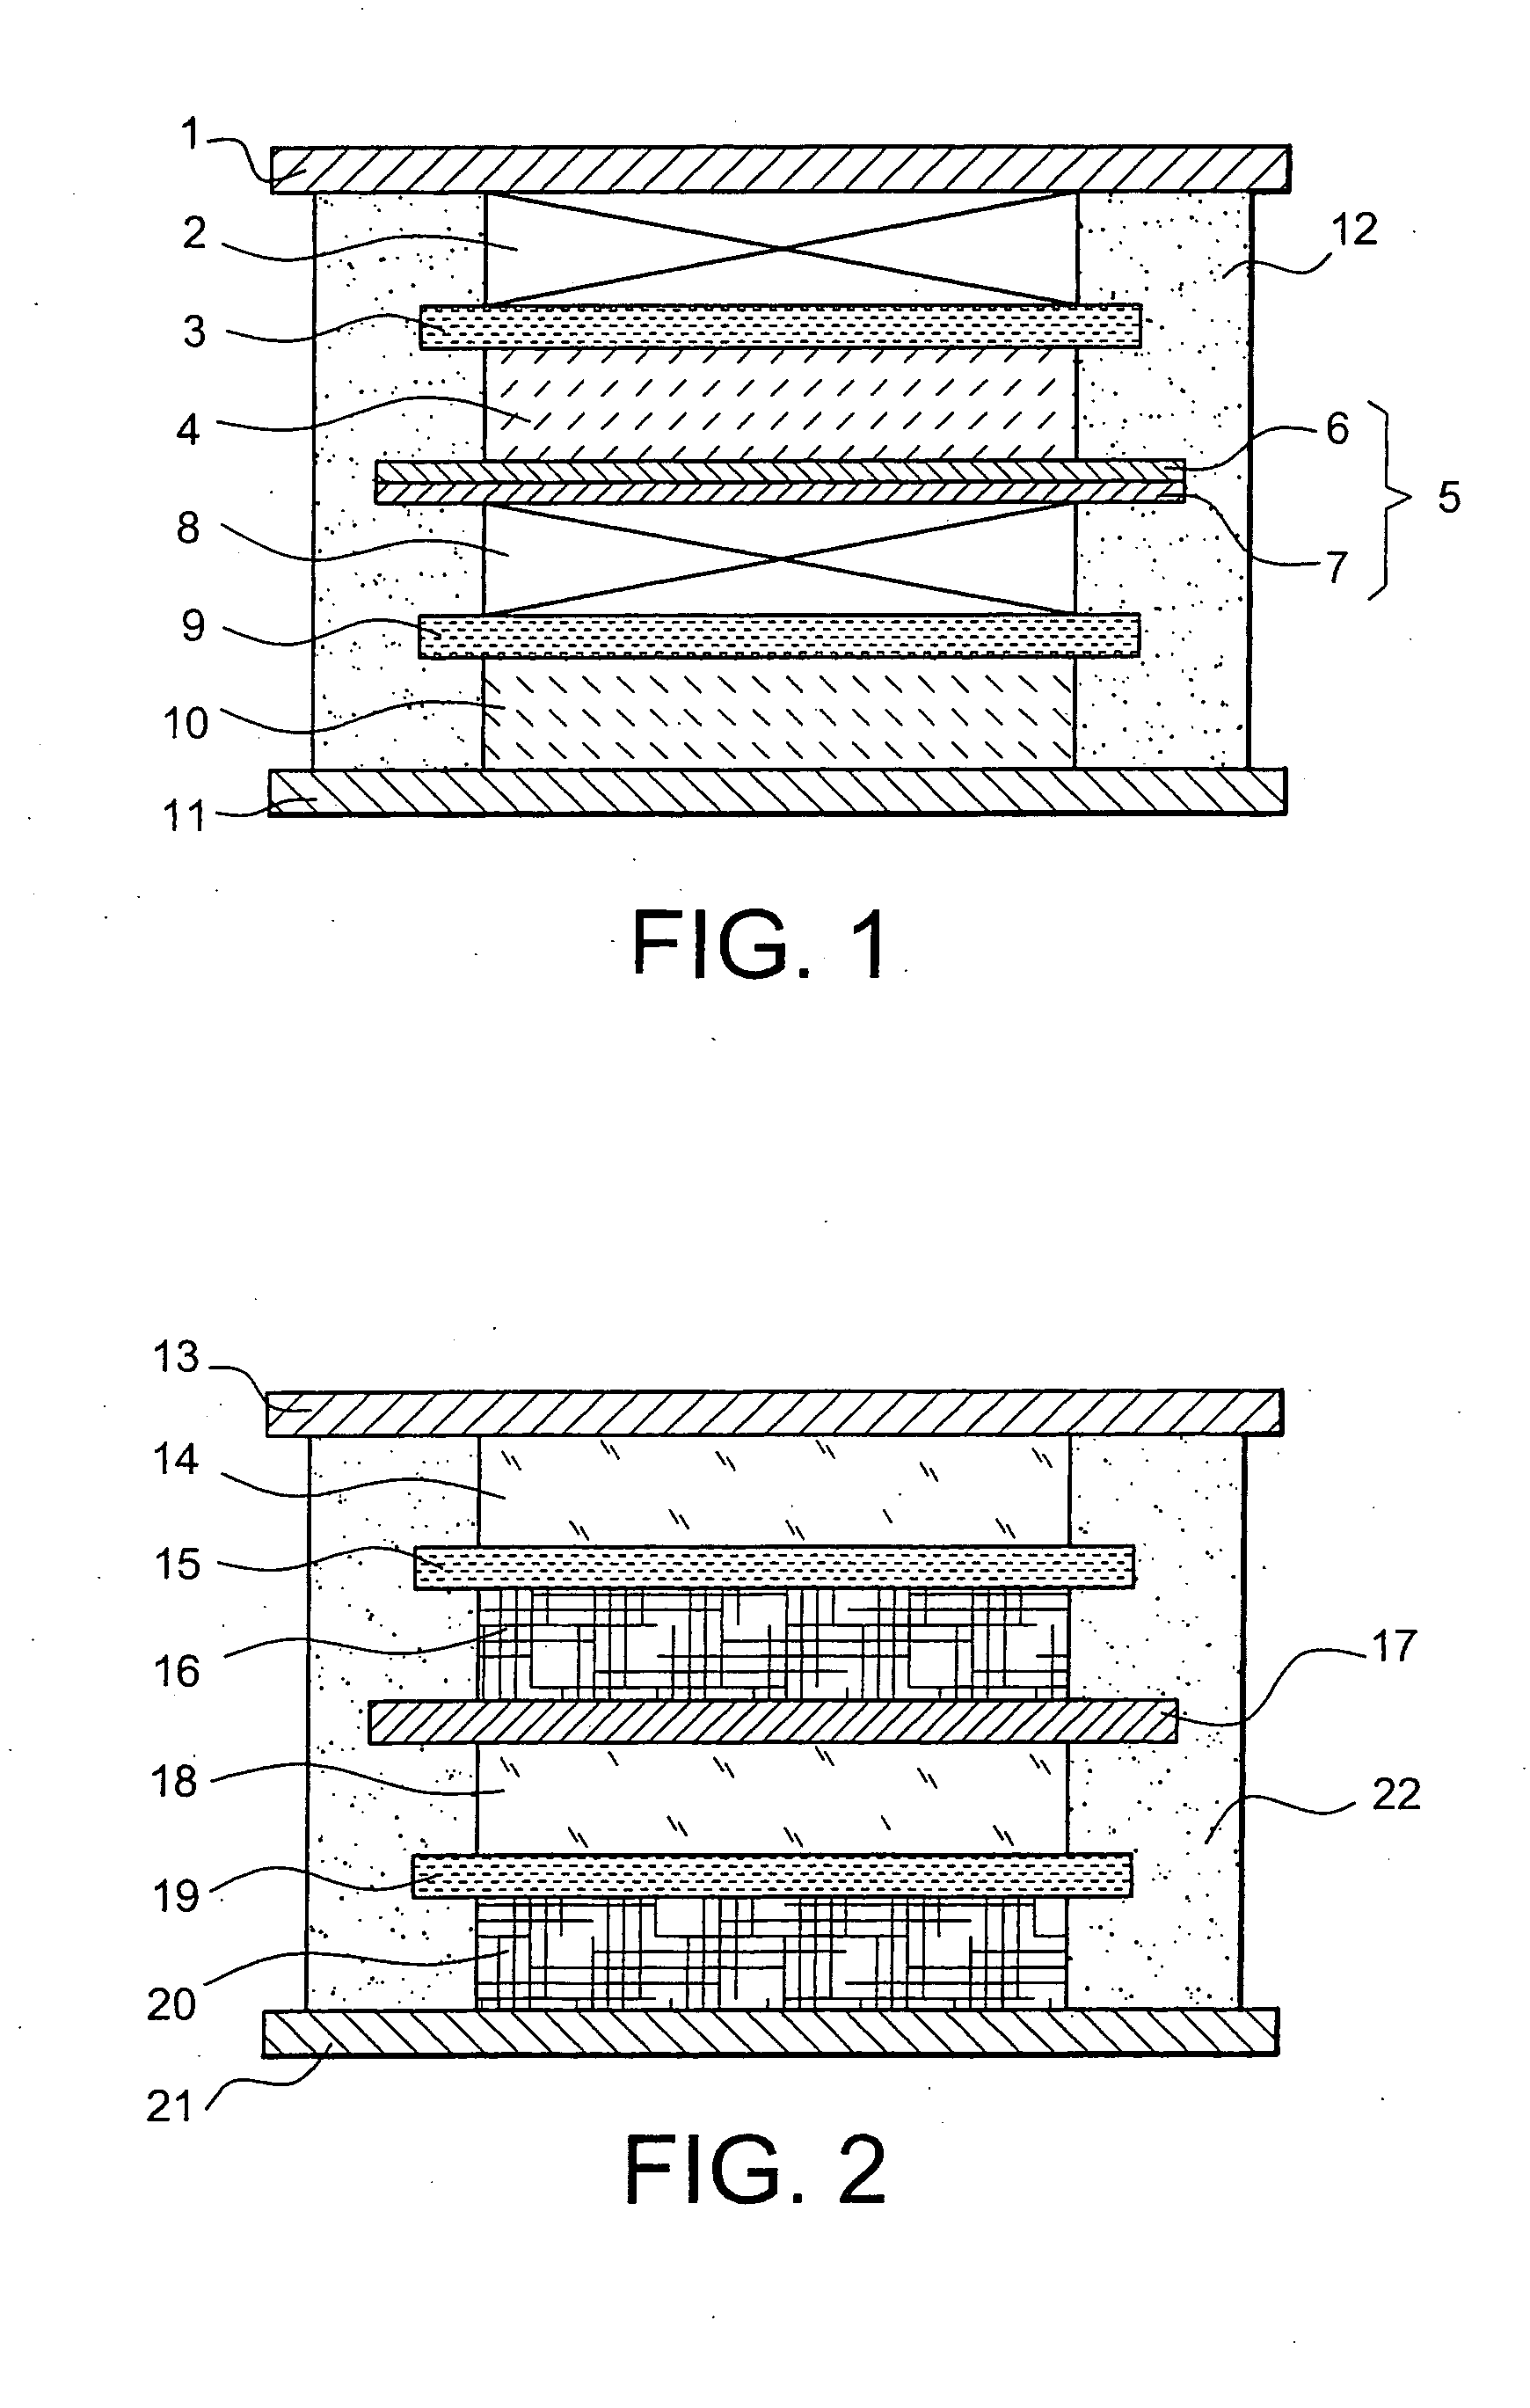 Lithium electrochemical generator comprising at least a bipolar electrode with conductive aluminium or aluminium alloy substrates